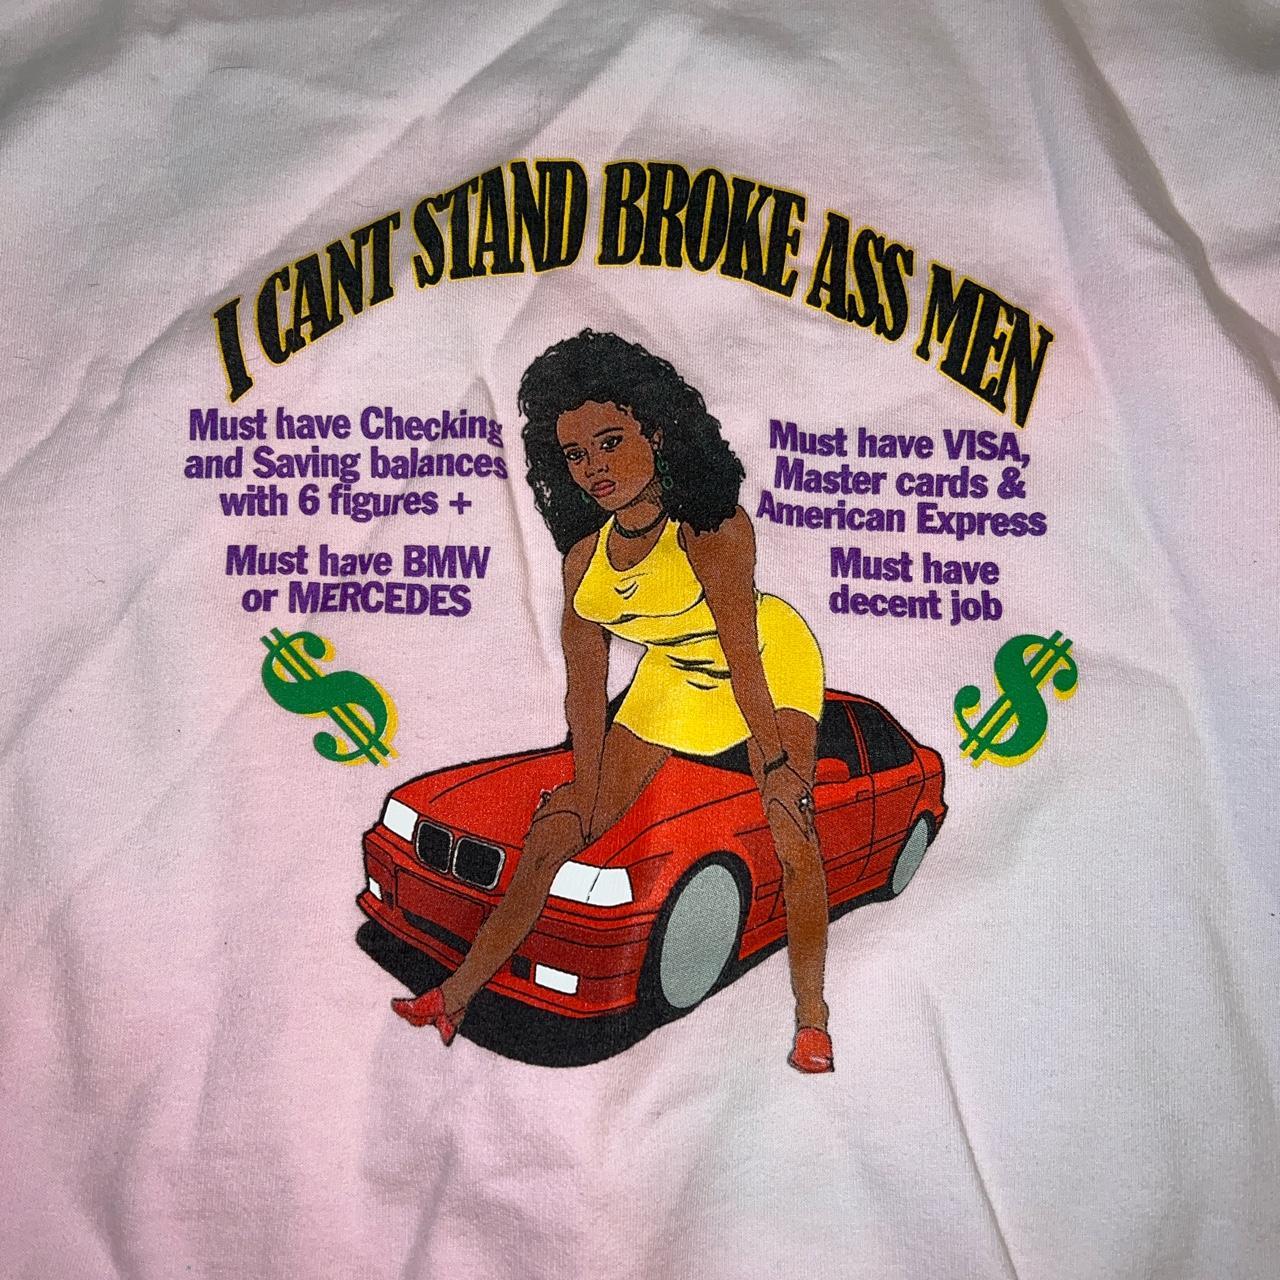 Product Image 2 - I CAN’T STAND BROKE ASS